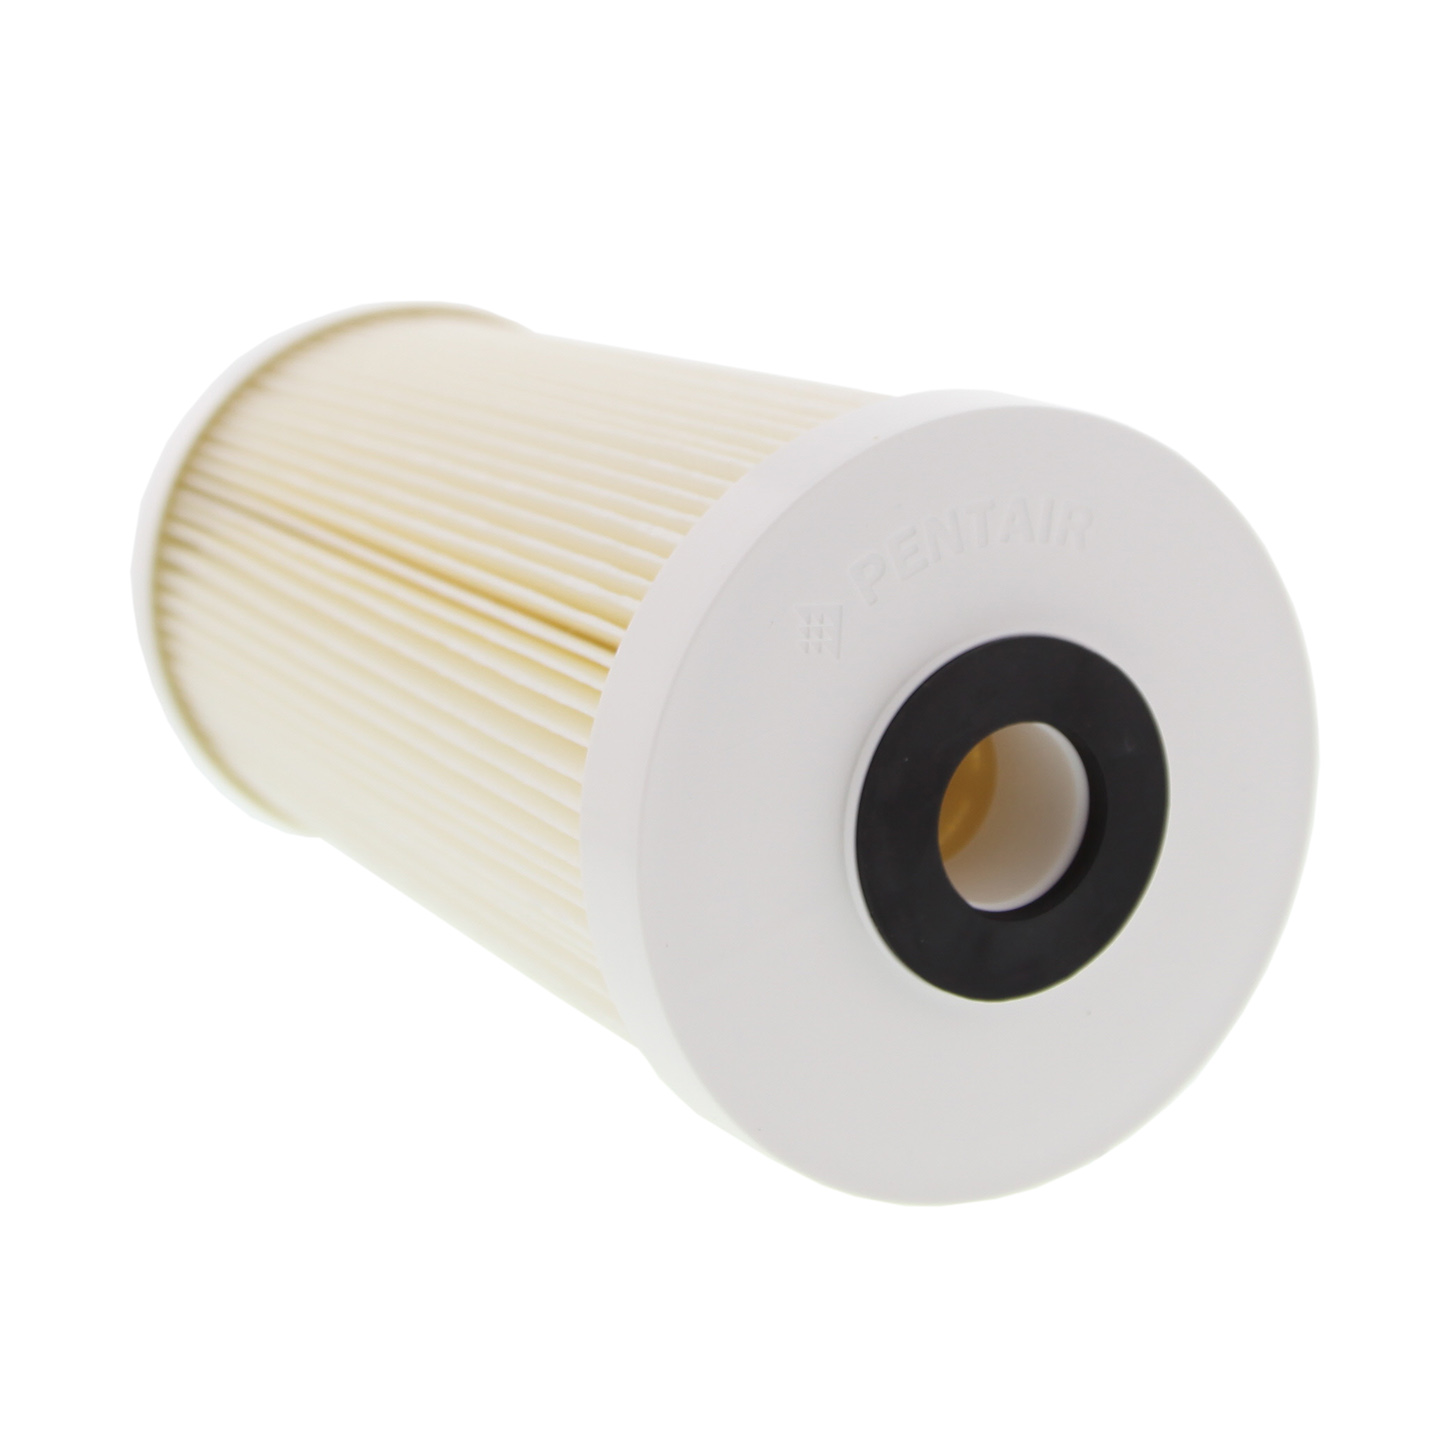 Pentair Pentek ECP5-BB 10" Big Blue Whole House Pleated Cellulose Polyester Sediment Water Filter - 5 Micron - image 2 of 5